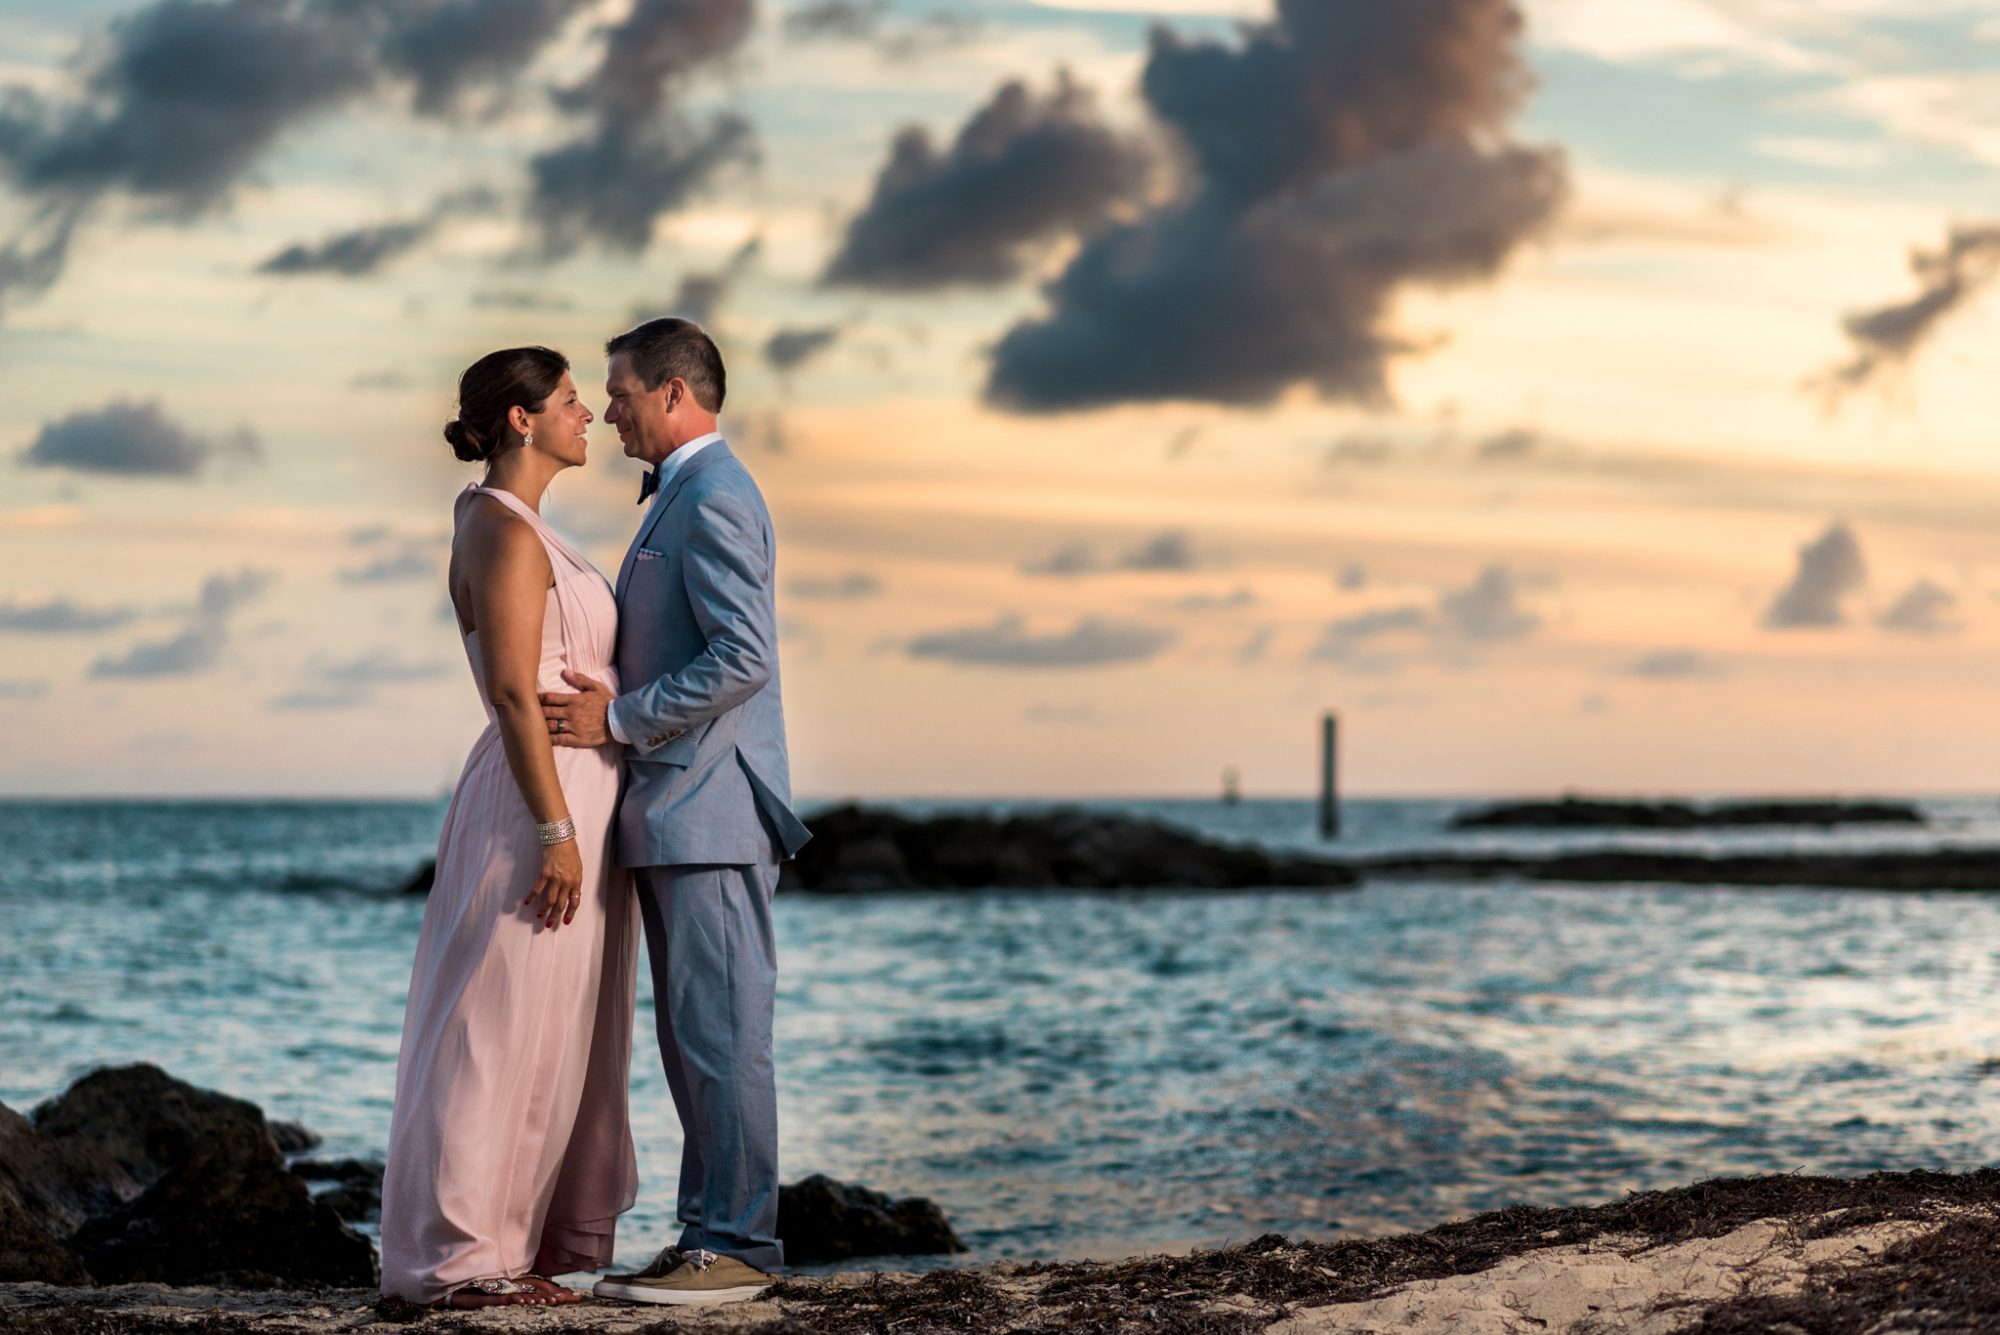 Freya and Jamie, a bride and groom, standing on a rock in Key West for their wedding ceremony.